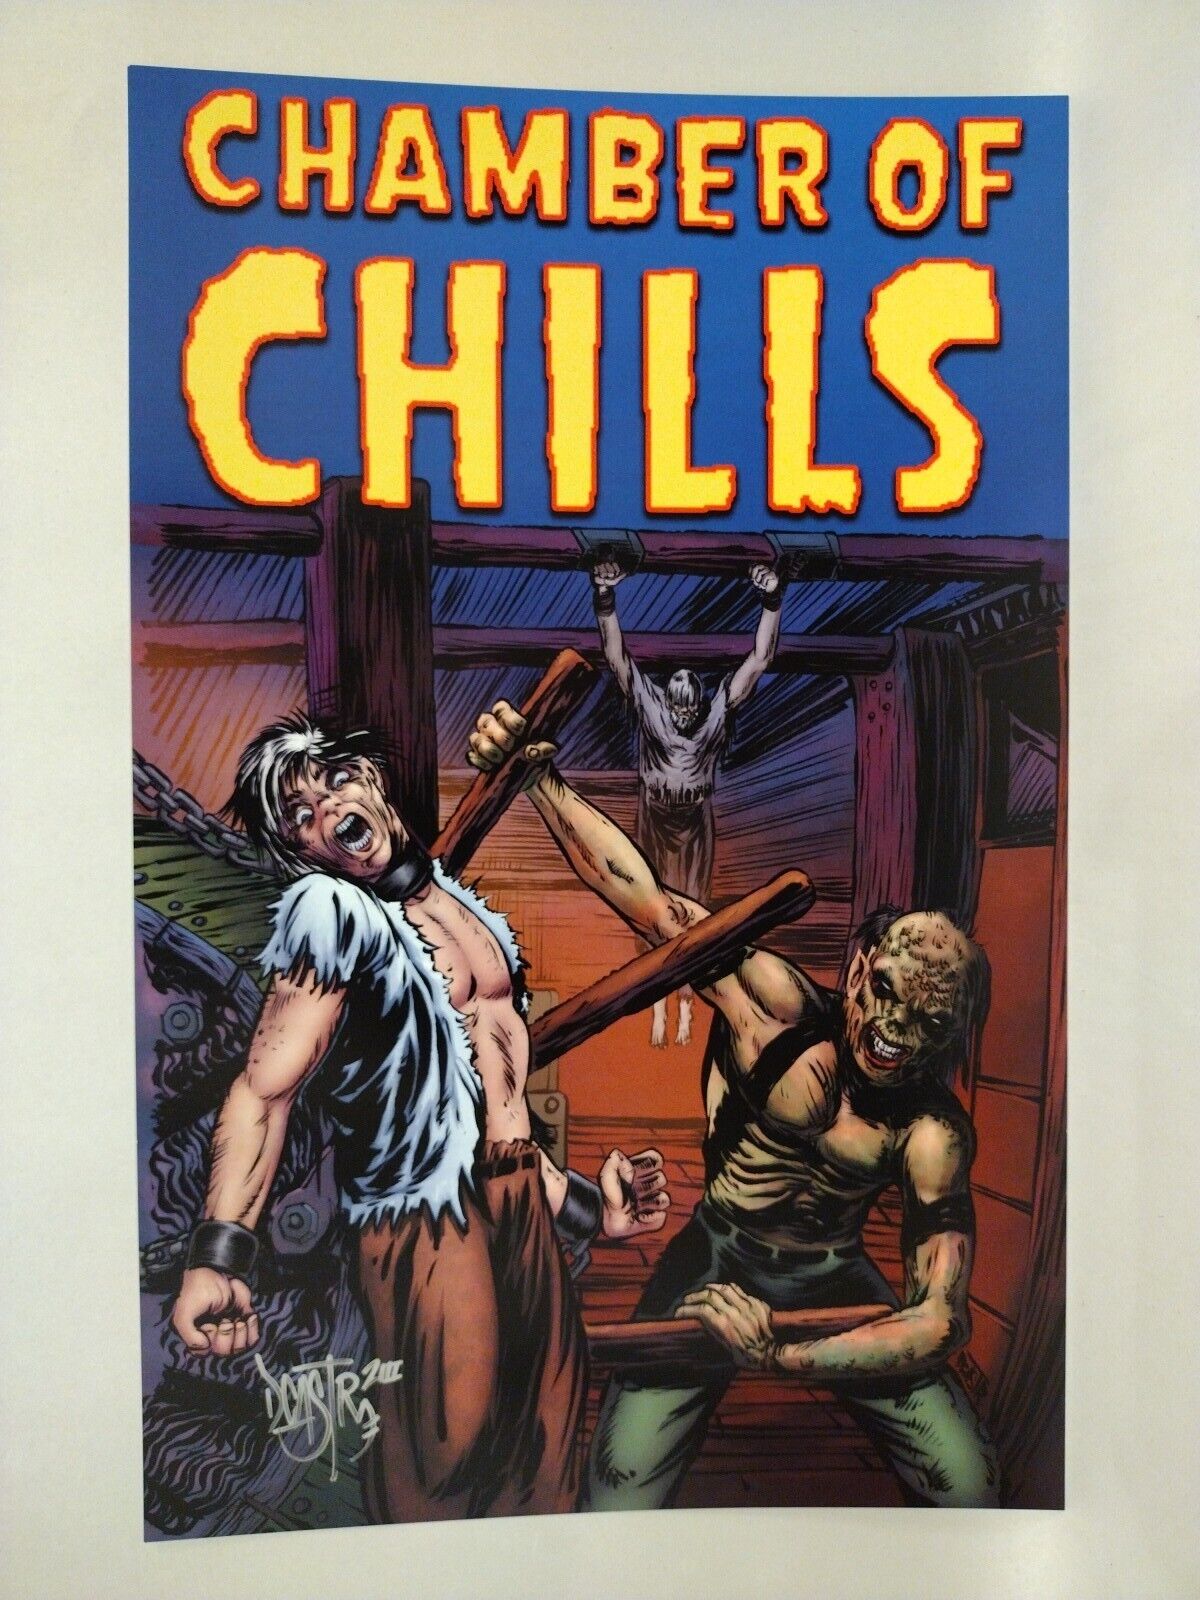 Chamber Of Chills #22 (2023) Dave Castr 11X17" Poster Print Signed ARG